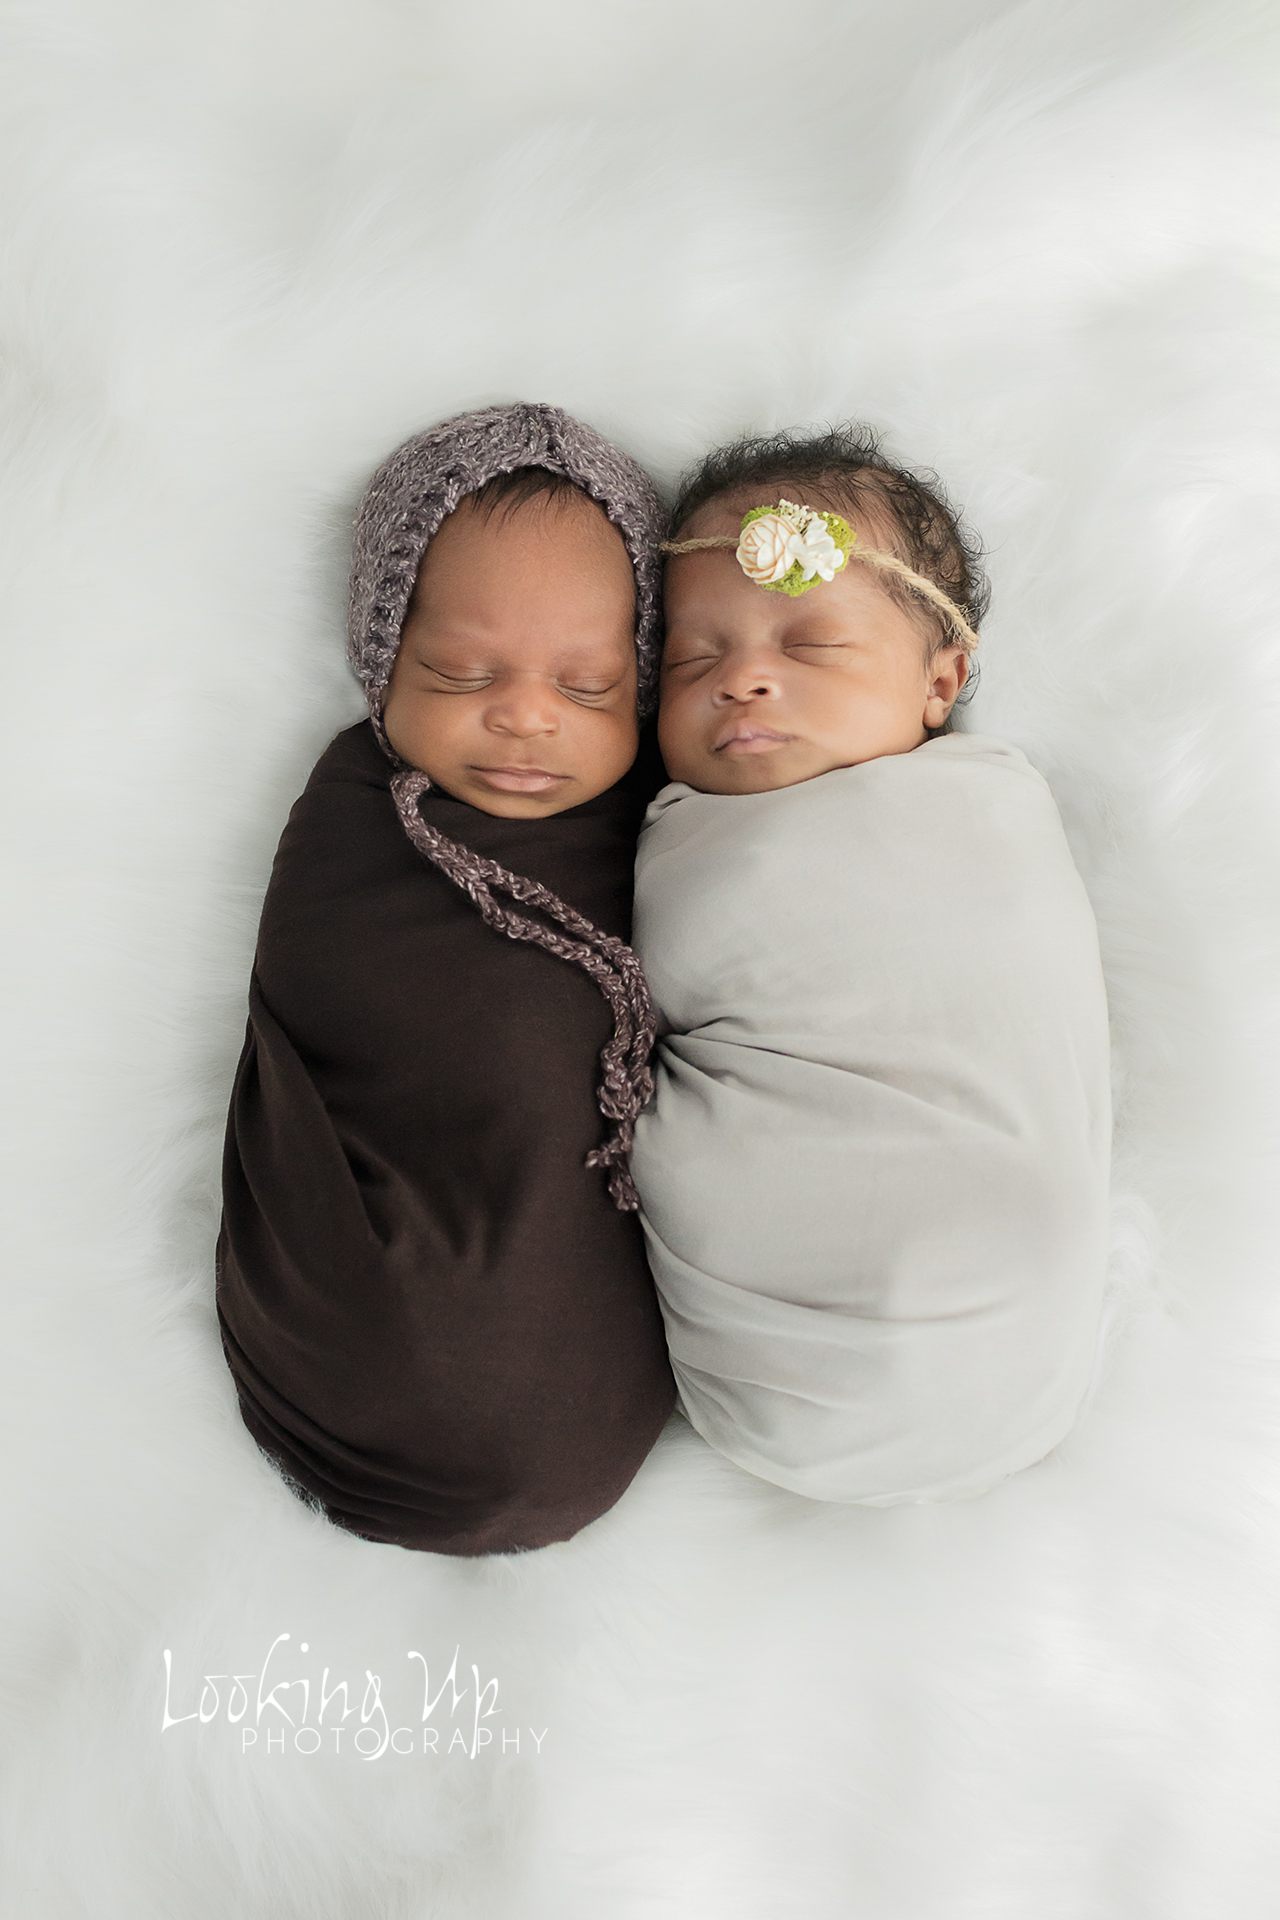 Double the Blessings (Darien Infant Photography)